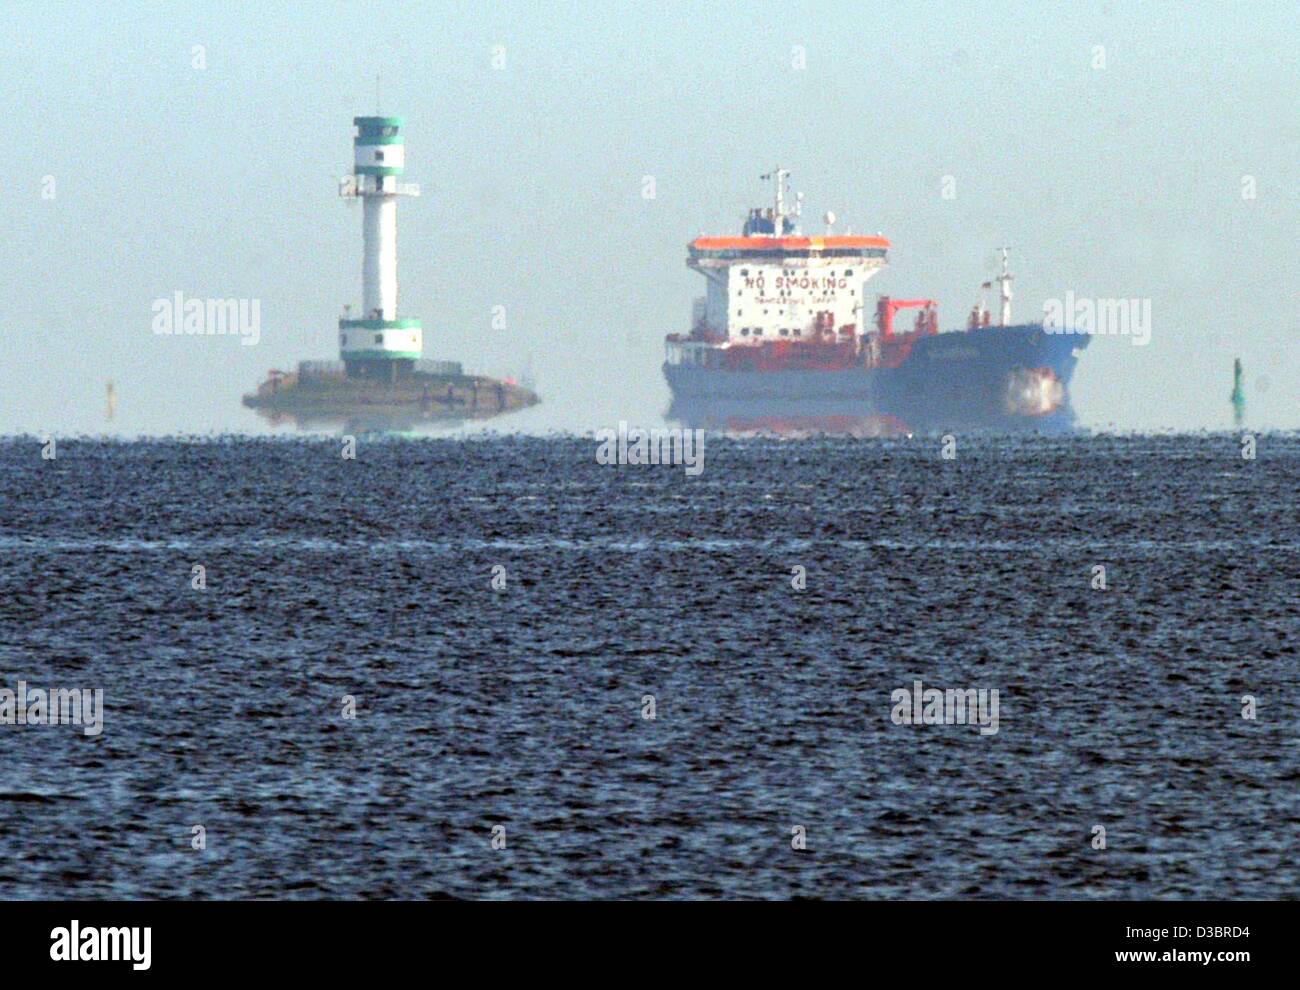 (dpa) - A cargo ship passes by a lighthouse in the distance inlet to the Kieler Foerde (fjord) near Kiel, Germany, 1 October 2003. The lighthouse appears to hover above the water surface due to the mirage on the calm water. Stock Photo